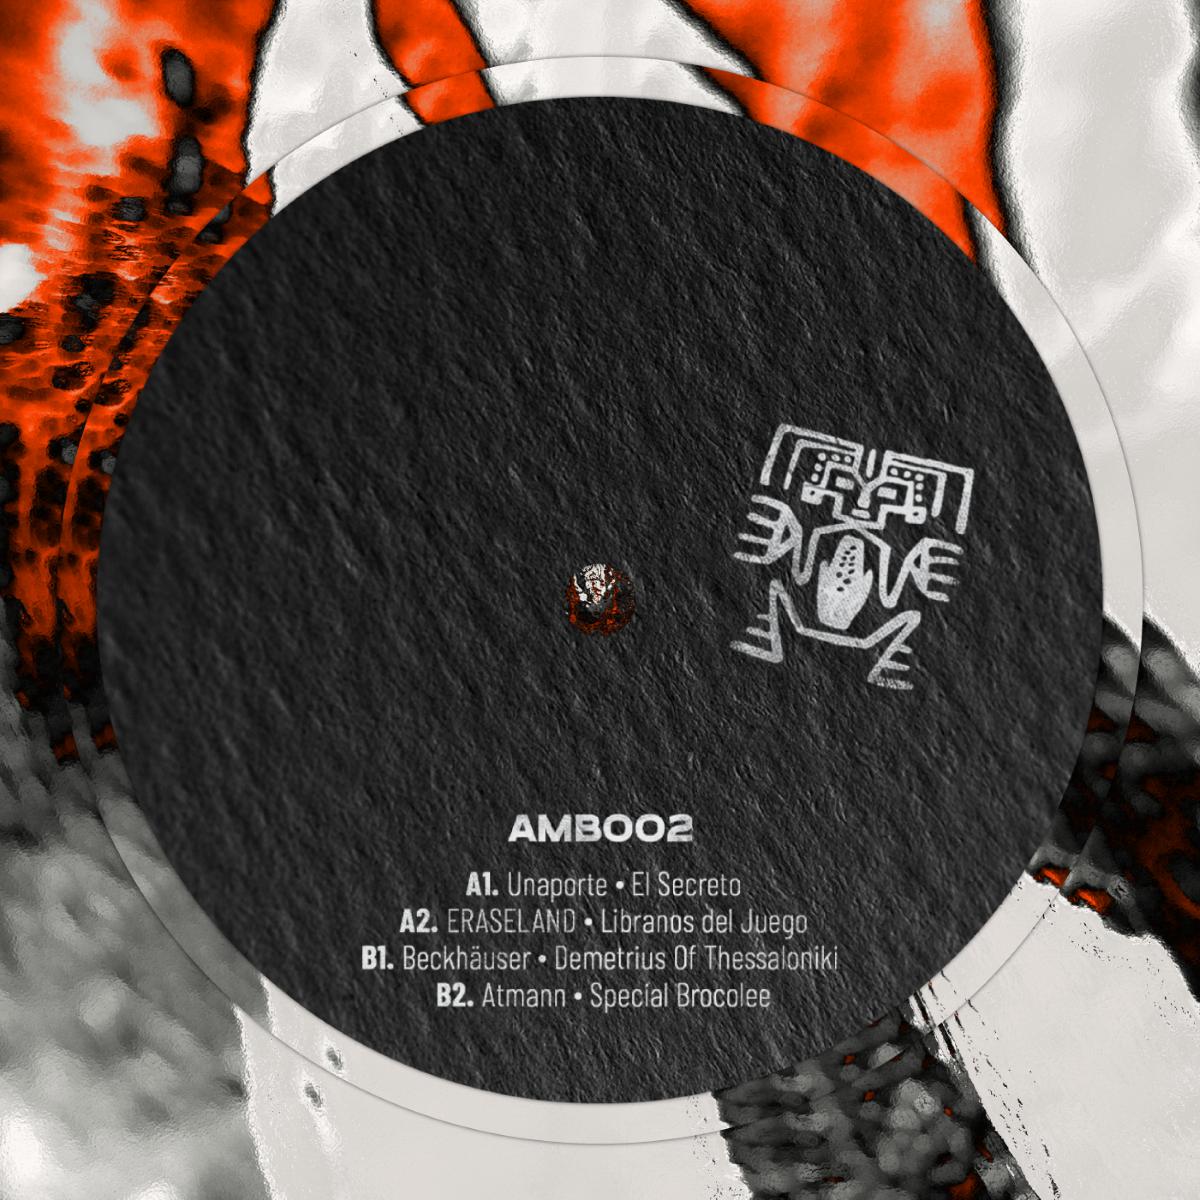 Download AMB002 on Electrobuzz